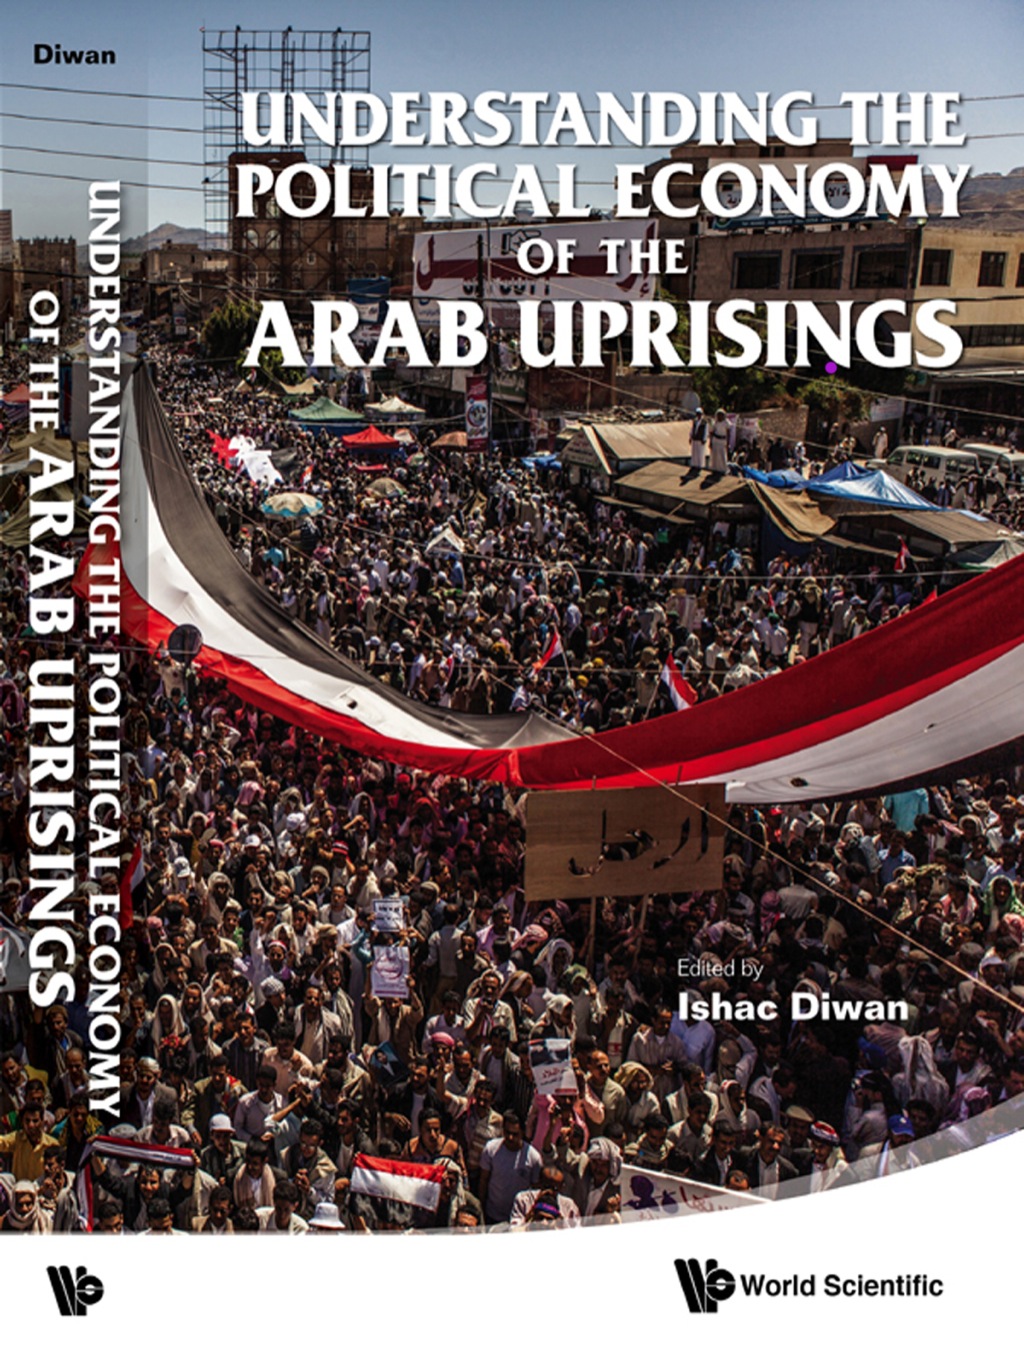 UNDERSTANDING THE POLITICAL ECONOMY OF THE ARAB UPRISINGS (eBook) - Author,